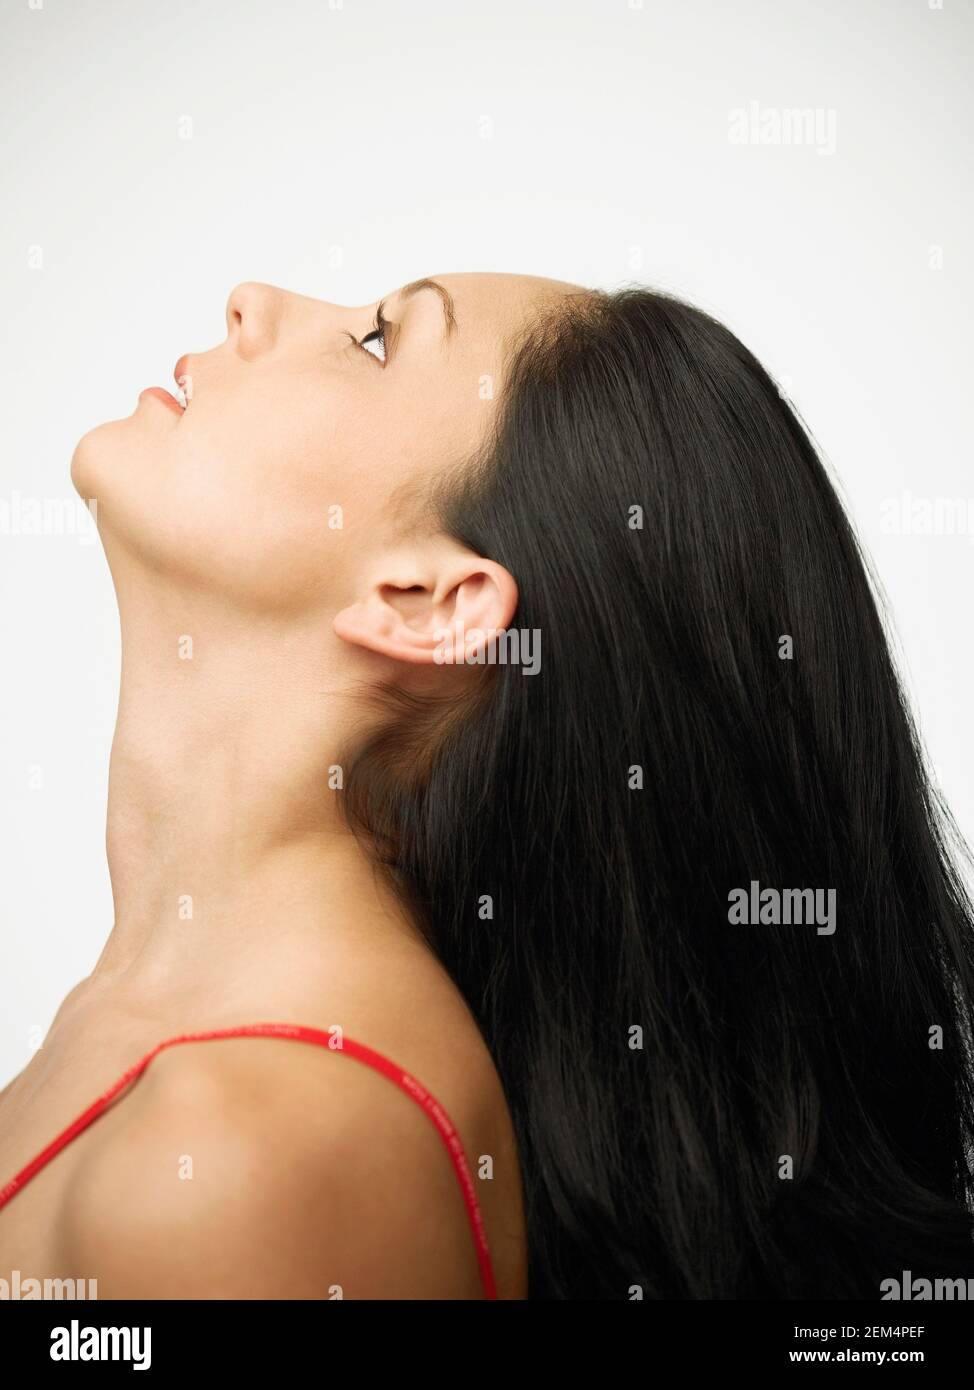 Side profile of a young woman looking up Stock Photo